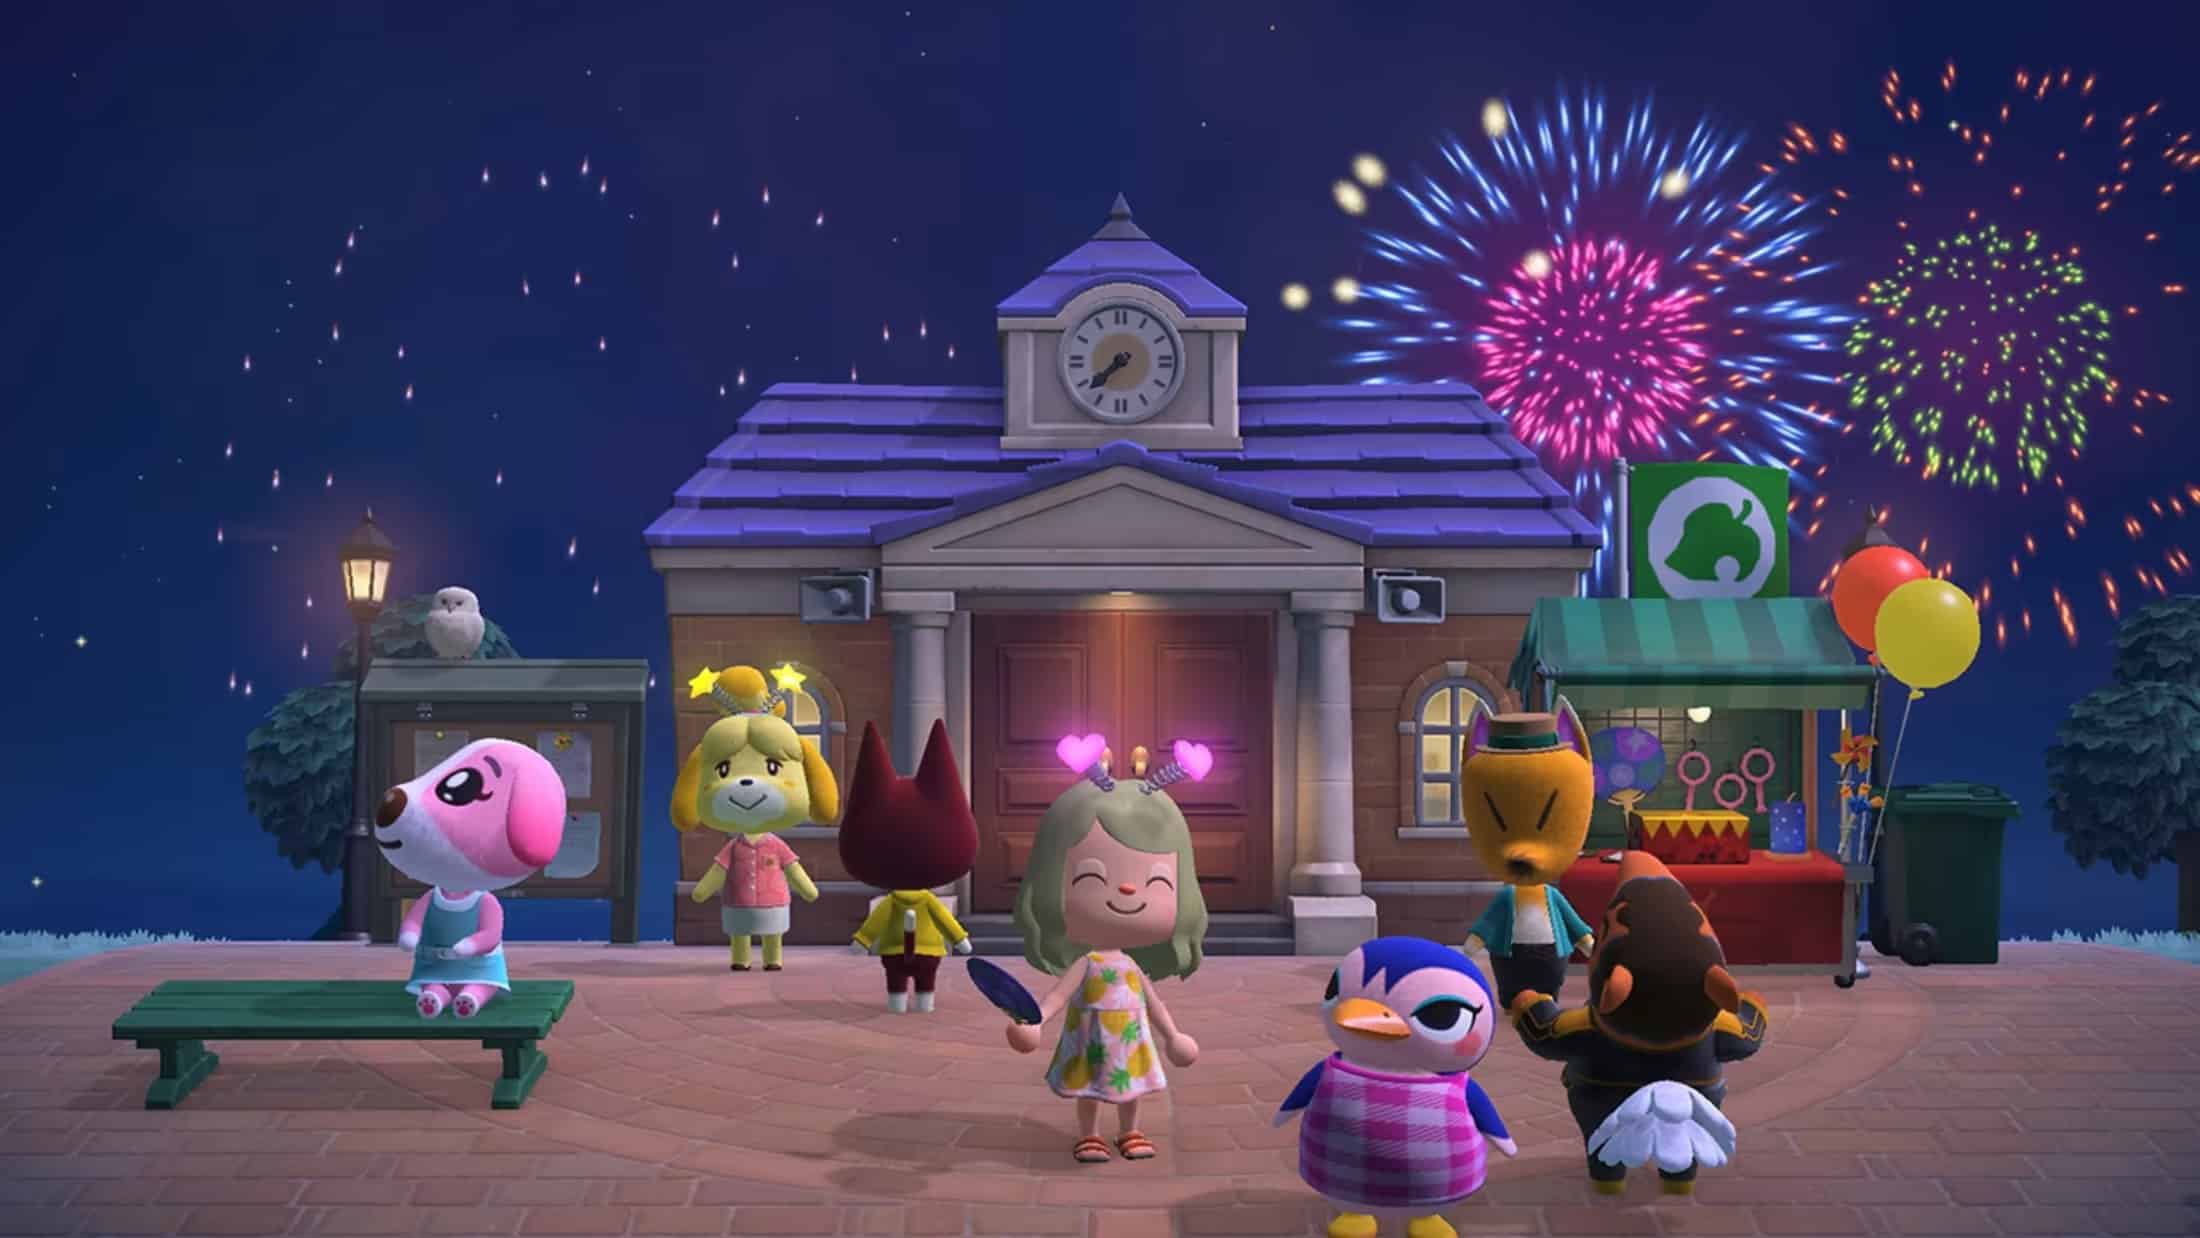 <p><a href="https://www.ign.com/articles/animal-crossing-new-horizons-review-for-switch"><em>New Horizons</em></a> is the newest major release for the franchise. It dropped in 2020 on Nintendo Switch from developer Nintendo EPD. The game returns to the classic structure of the <em>Animal Crossing</em> games with additions to help renew the franchise. In this game, a major focus is crafting items, such as tools, by gathering and building them.</p>    <p>Once again, you meet Hawaiian shirt-wearing Tom Nook, who sends you to a deserted island. On the island, you get a house that you must pay off by building, selling, and completing tasks. You can completely customize the island just like homes and towns in the past games. Don't worry; there is extensive home design customization as well.</p>    <p>There is online multiplayer, which mainly consists of visiting other players' unique and highly customized islands. While you can only have one island per switch, eight islanders can live on the same island, and four players can play simultaneously on a single island through the same console. The game won multiple awards and is still popular with fans.</p><p>Want to see more content like this on your Microsoft Start page?</p> <p>Simply click “Follow” near the headline of this article.</p> <p>After that, be sure to let us know what you think about this content in the comments!</p>